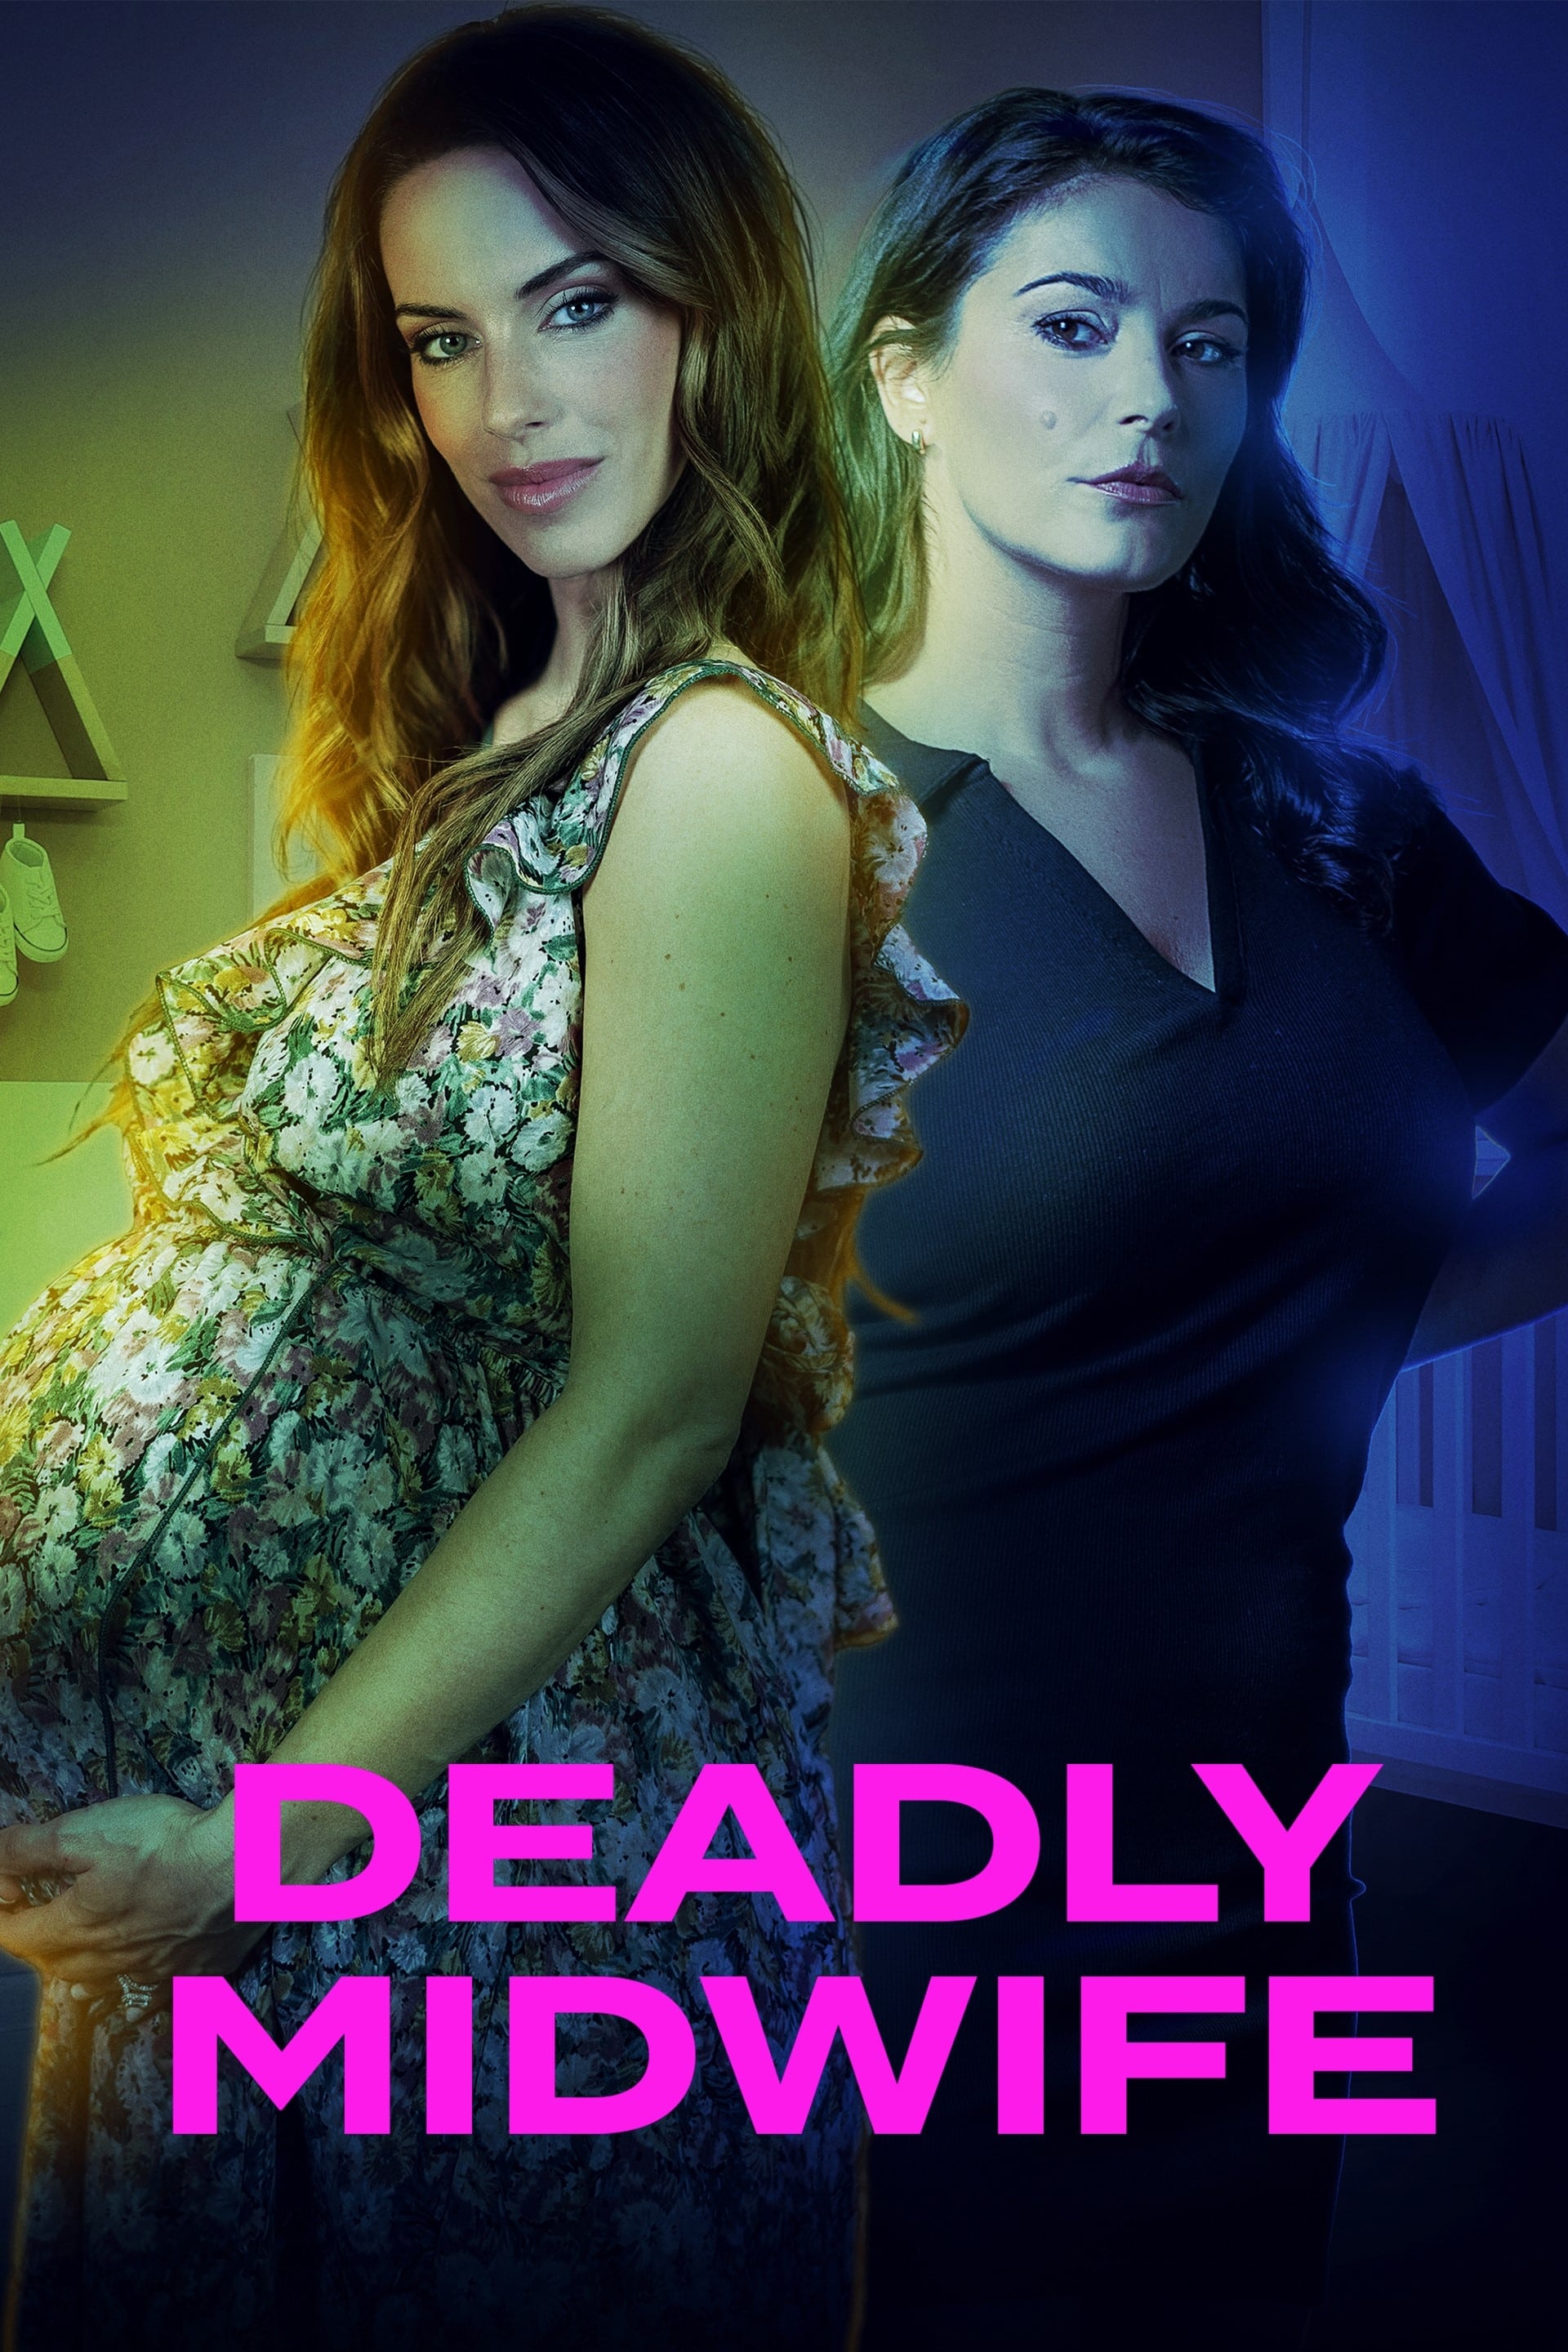 Deadly Midwife film